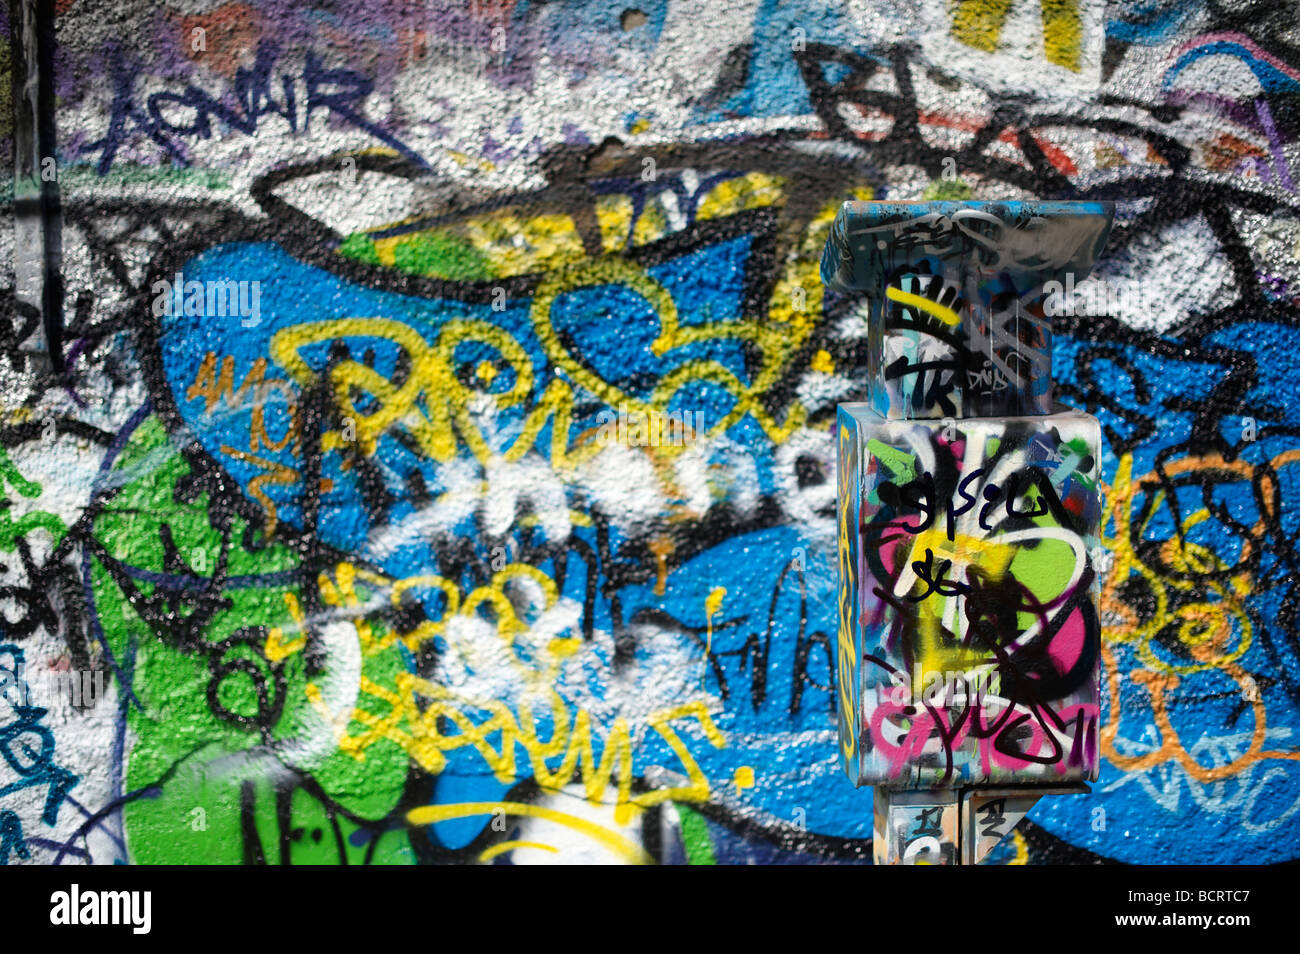 Parking meter covered in graffiti along with Wall, Windmill Lane Dublin Ireland Stock Photo